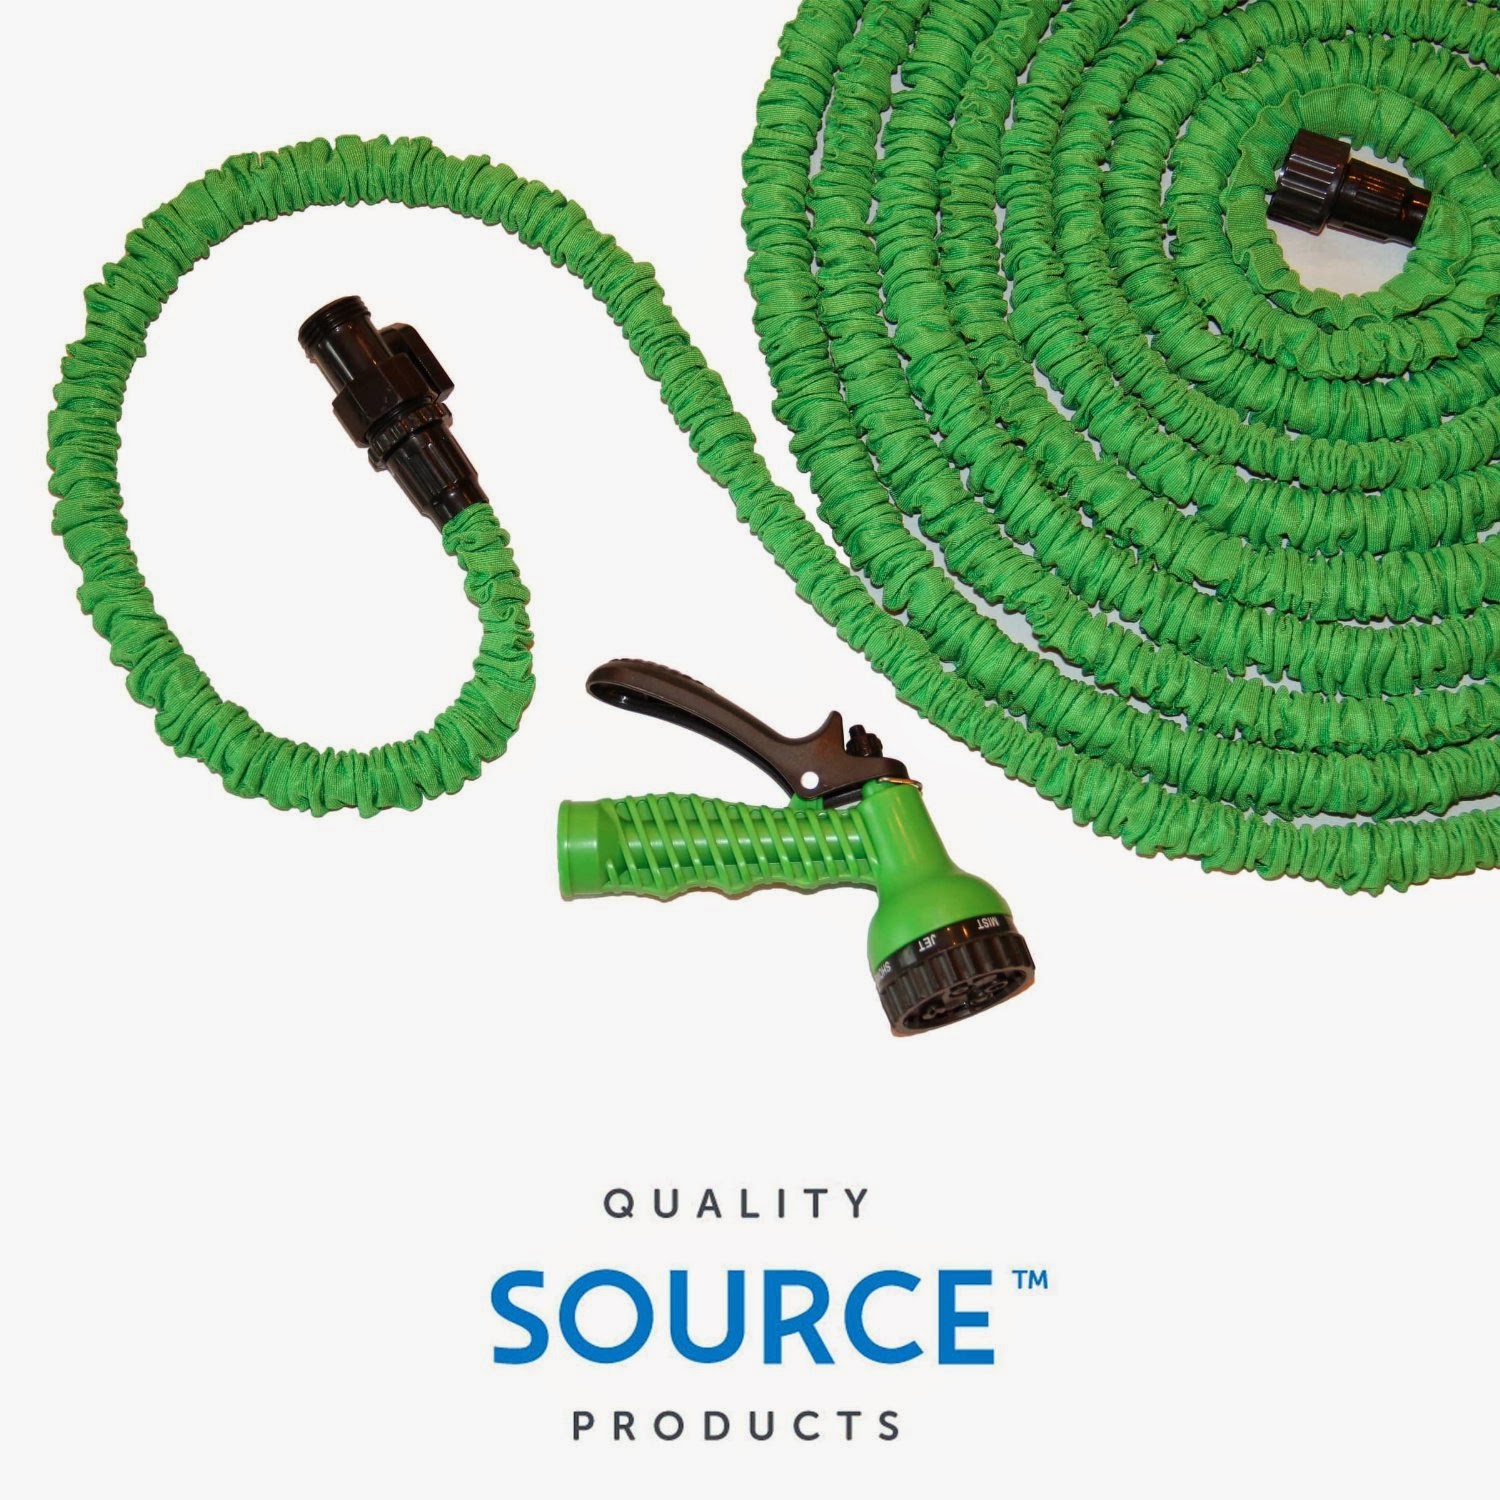 Quality Source Products - Expandable Hose